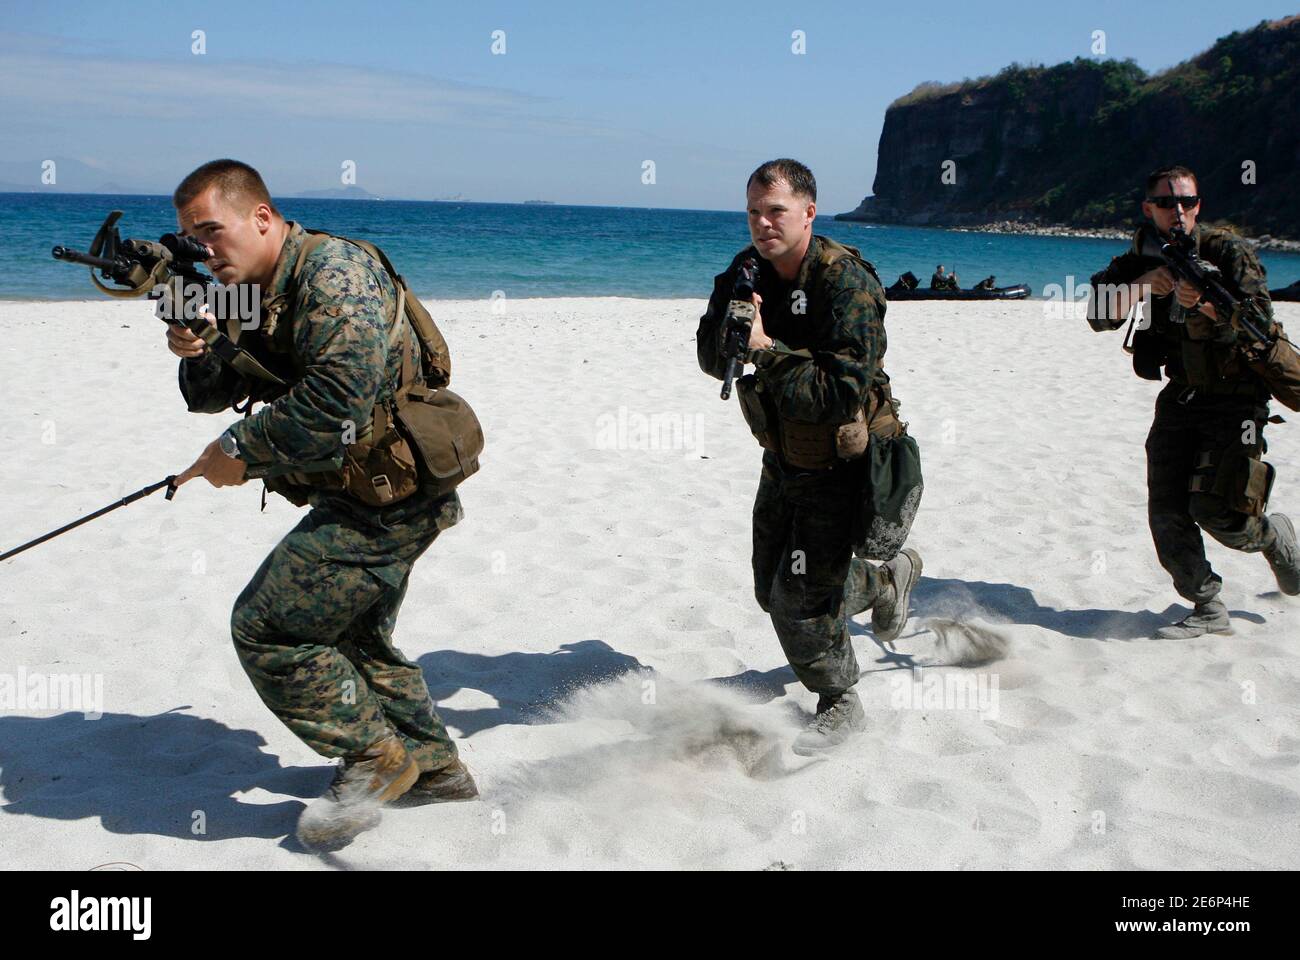 U.S Marines of Battalion Landing Team 2/7 Fox Company perform a mock assault during the annual U.S.-Philippines war exercises at a marine base in Ternate, Cavite March 9, 2010. The annual military exercise between the two countries' main focus this year will be on disaster, rescue and relief operations.       REUTERS/Erik de Castro (PHILIPPINES - Tags: MILITARY POLITICS) Stock Photo